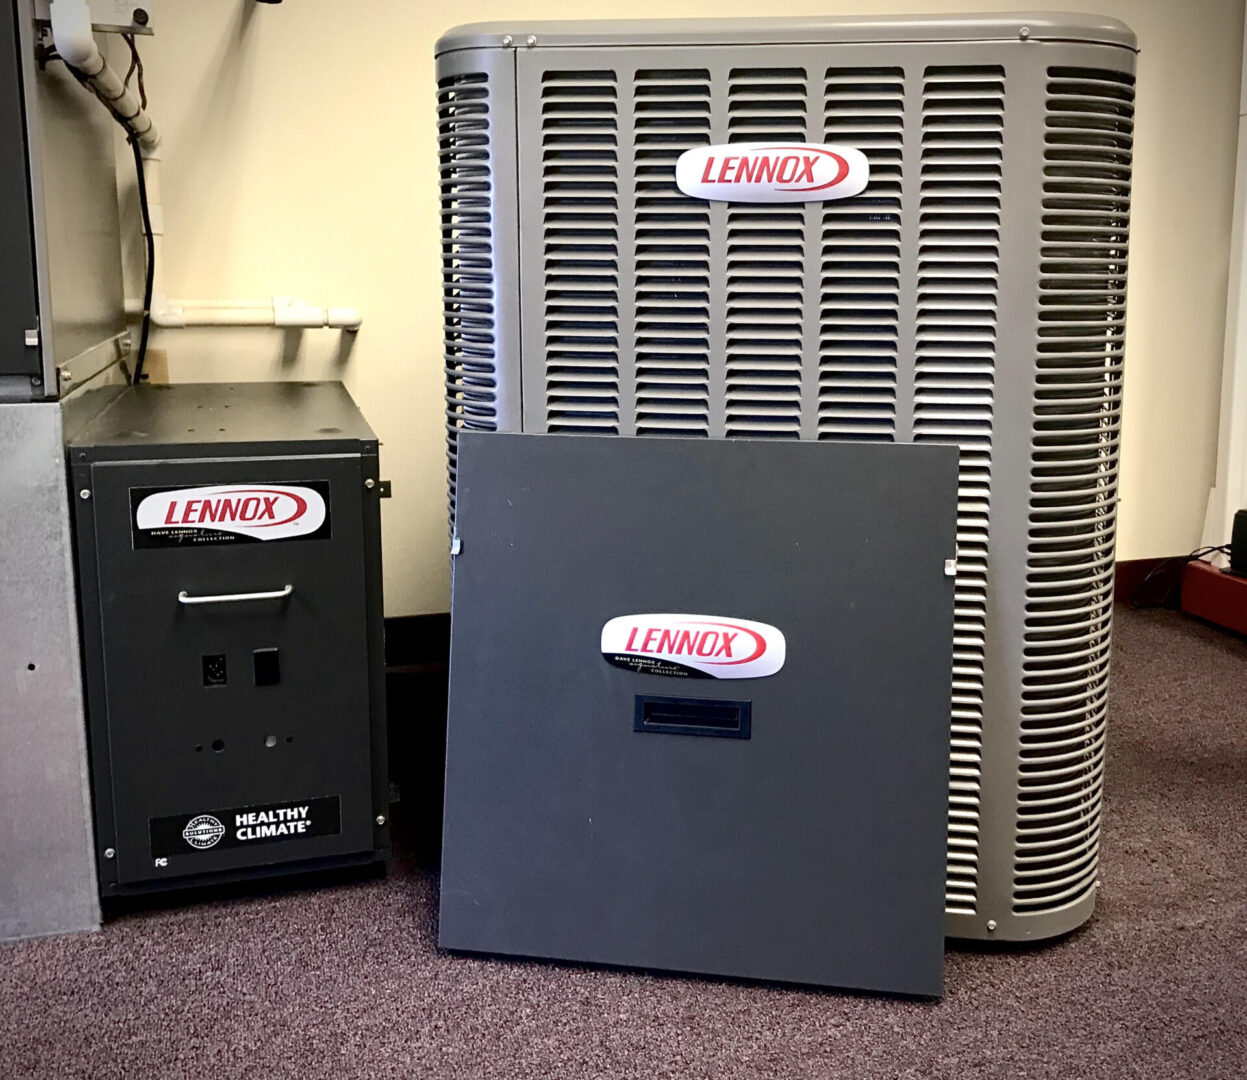 Lennox heating and cooling products in Springfield, MO.